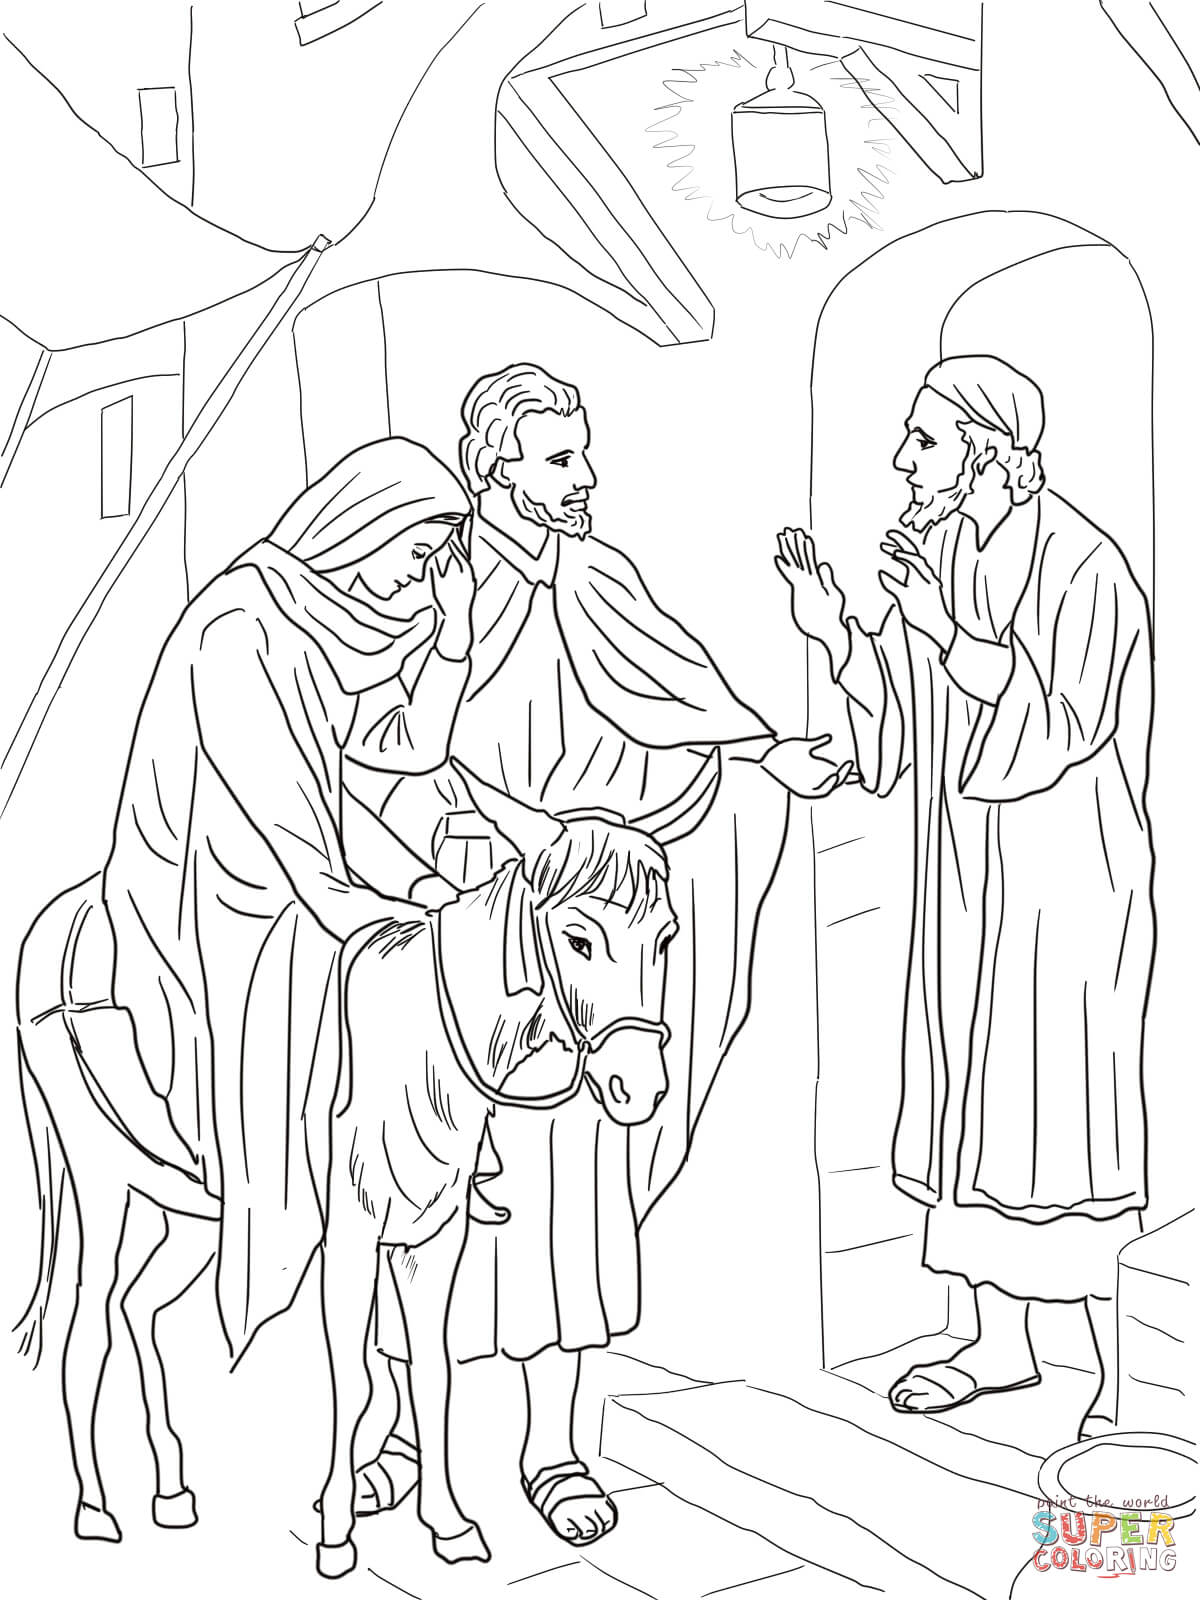 Mary and Joseph on the Road to Bethlehem coloring page | Free ...